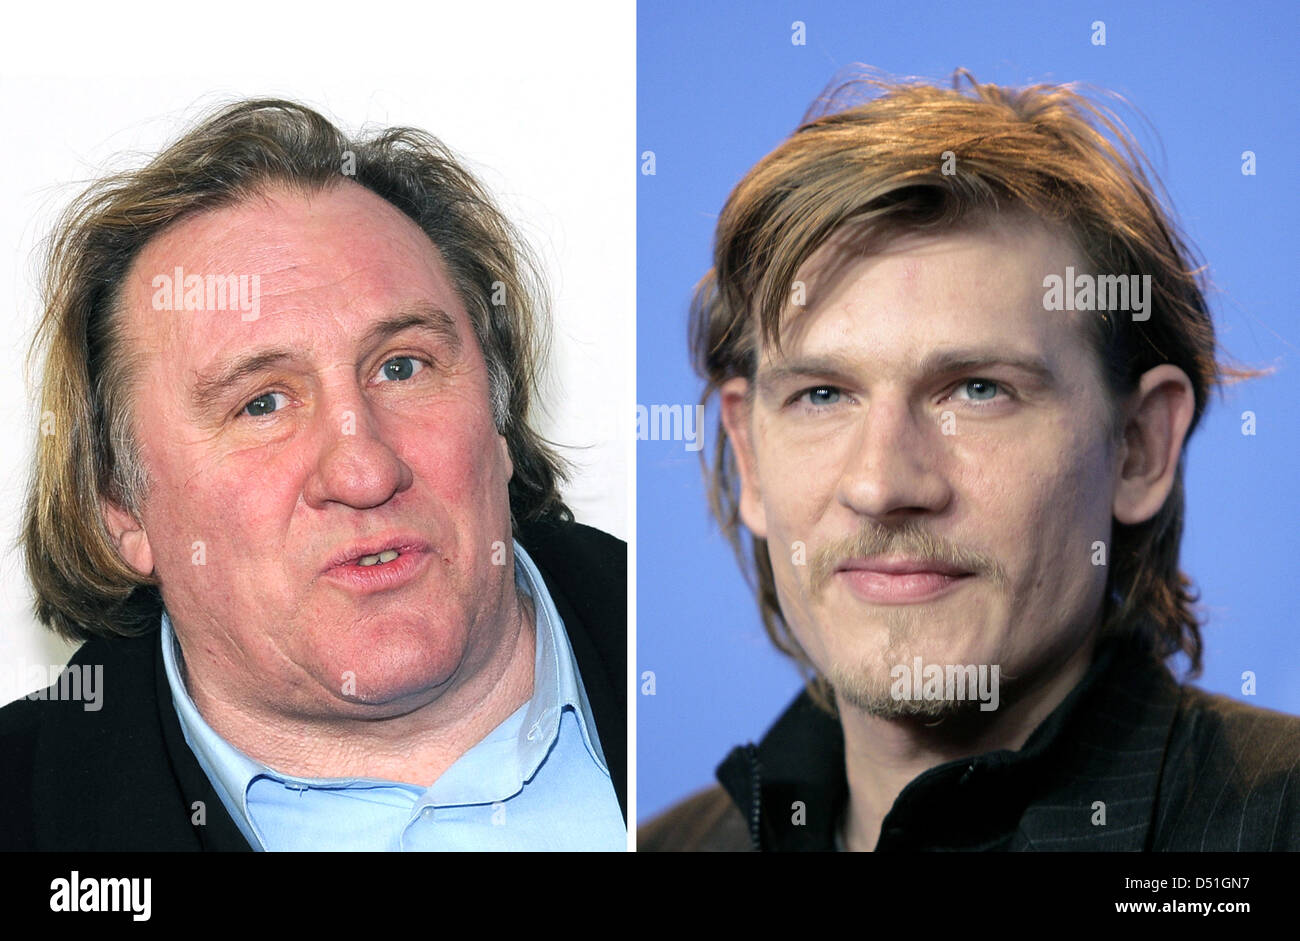 A Picture Combo Made Of File Pictures Of French Actor Gerard Depardieu L 01 December 10 And His Son Guillaume Depardieu R 15 February 07 Guillaume Who Died In 08 Did Drugs